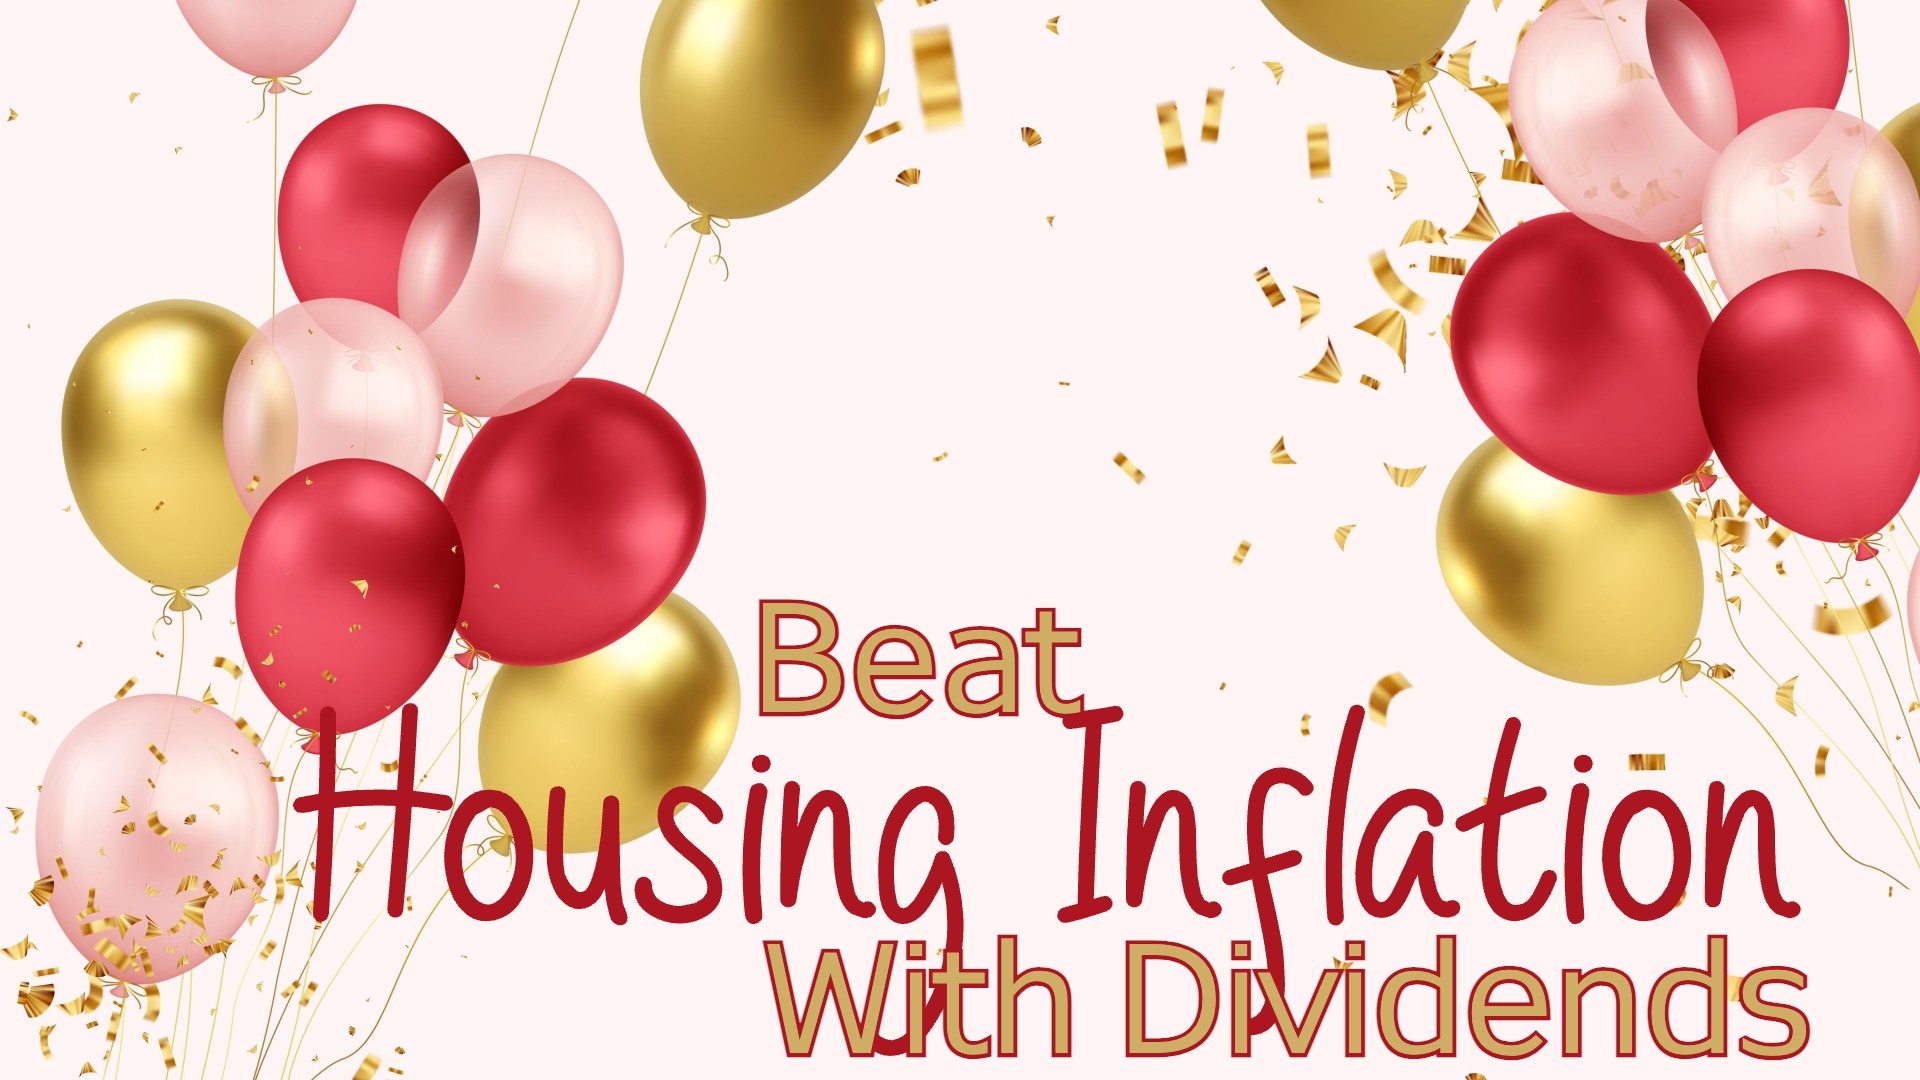 Beat Housing Inflation with Dividends